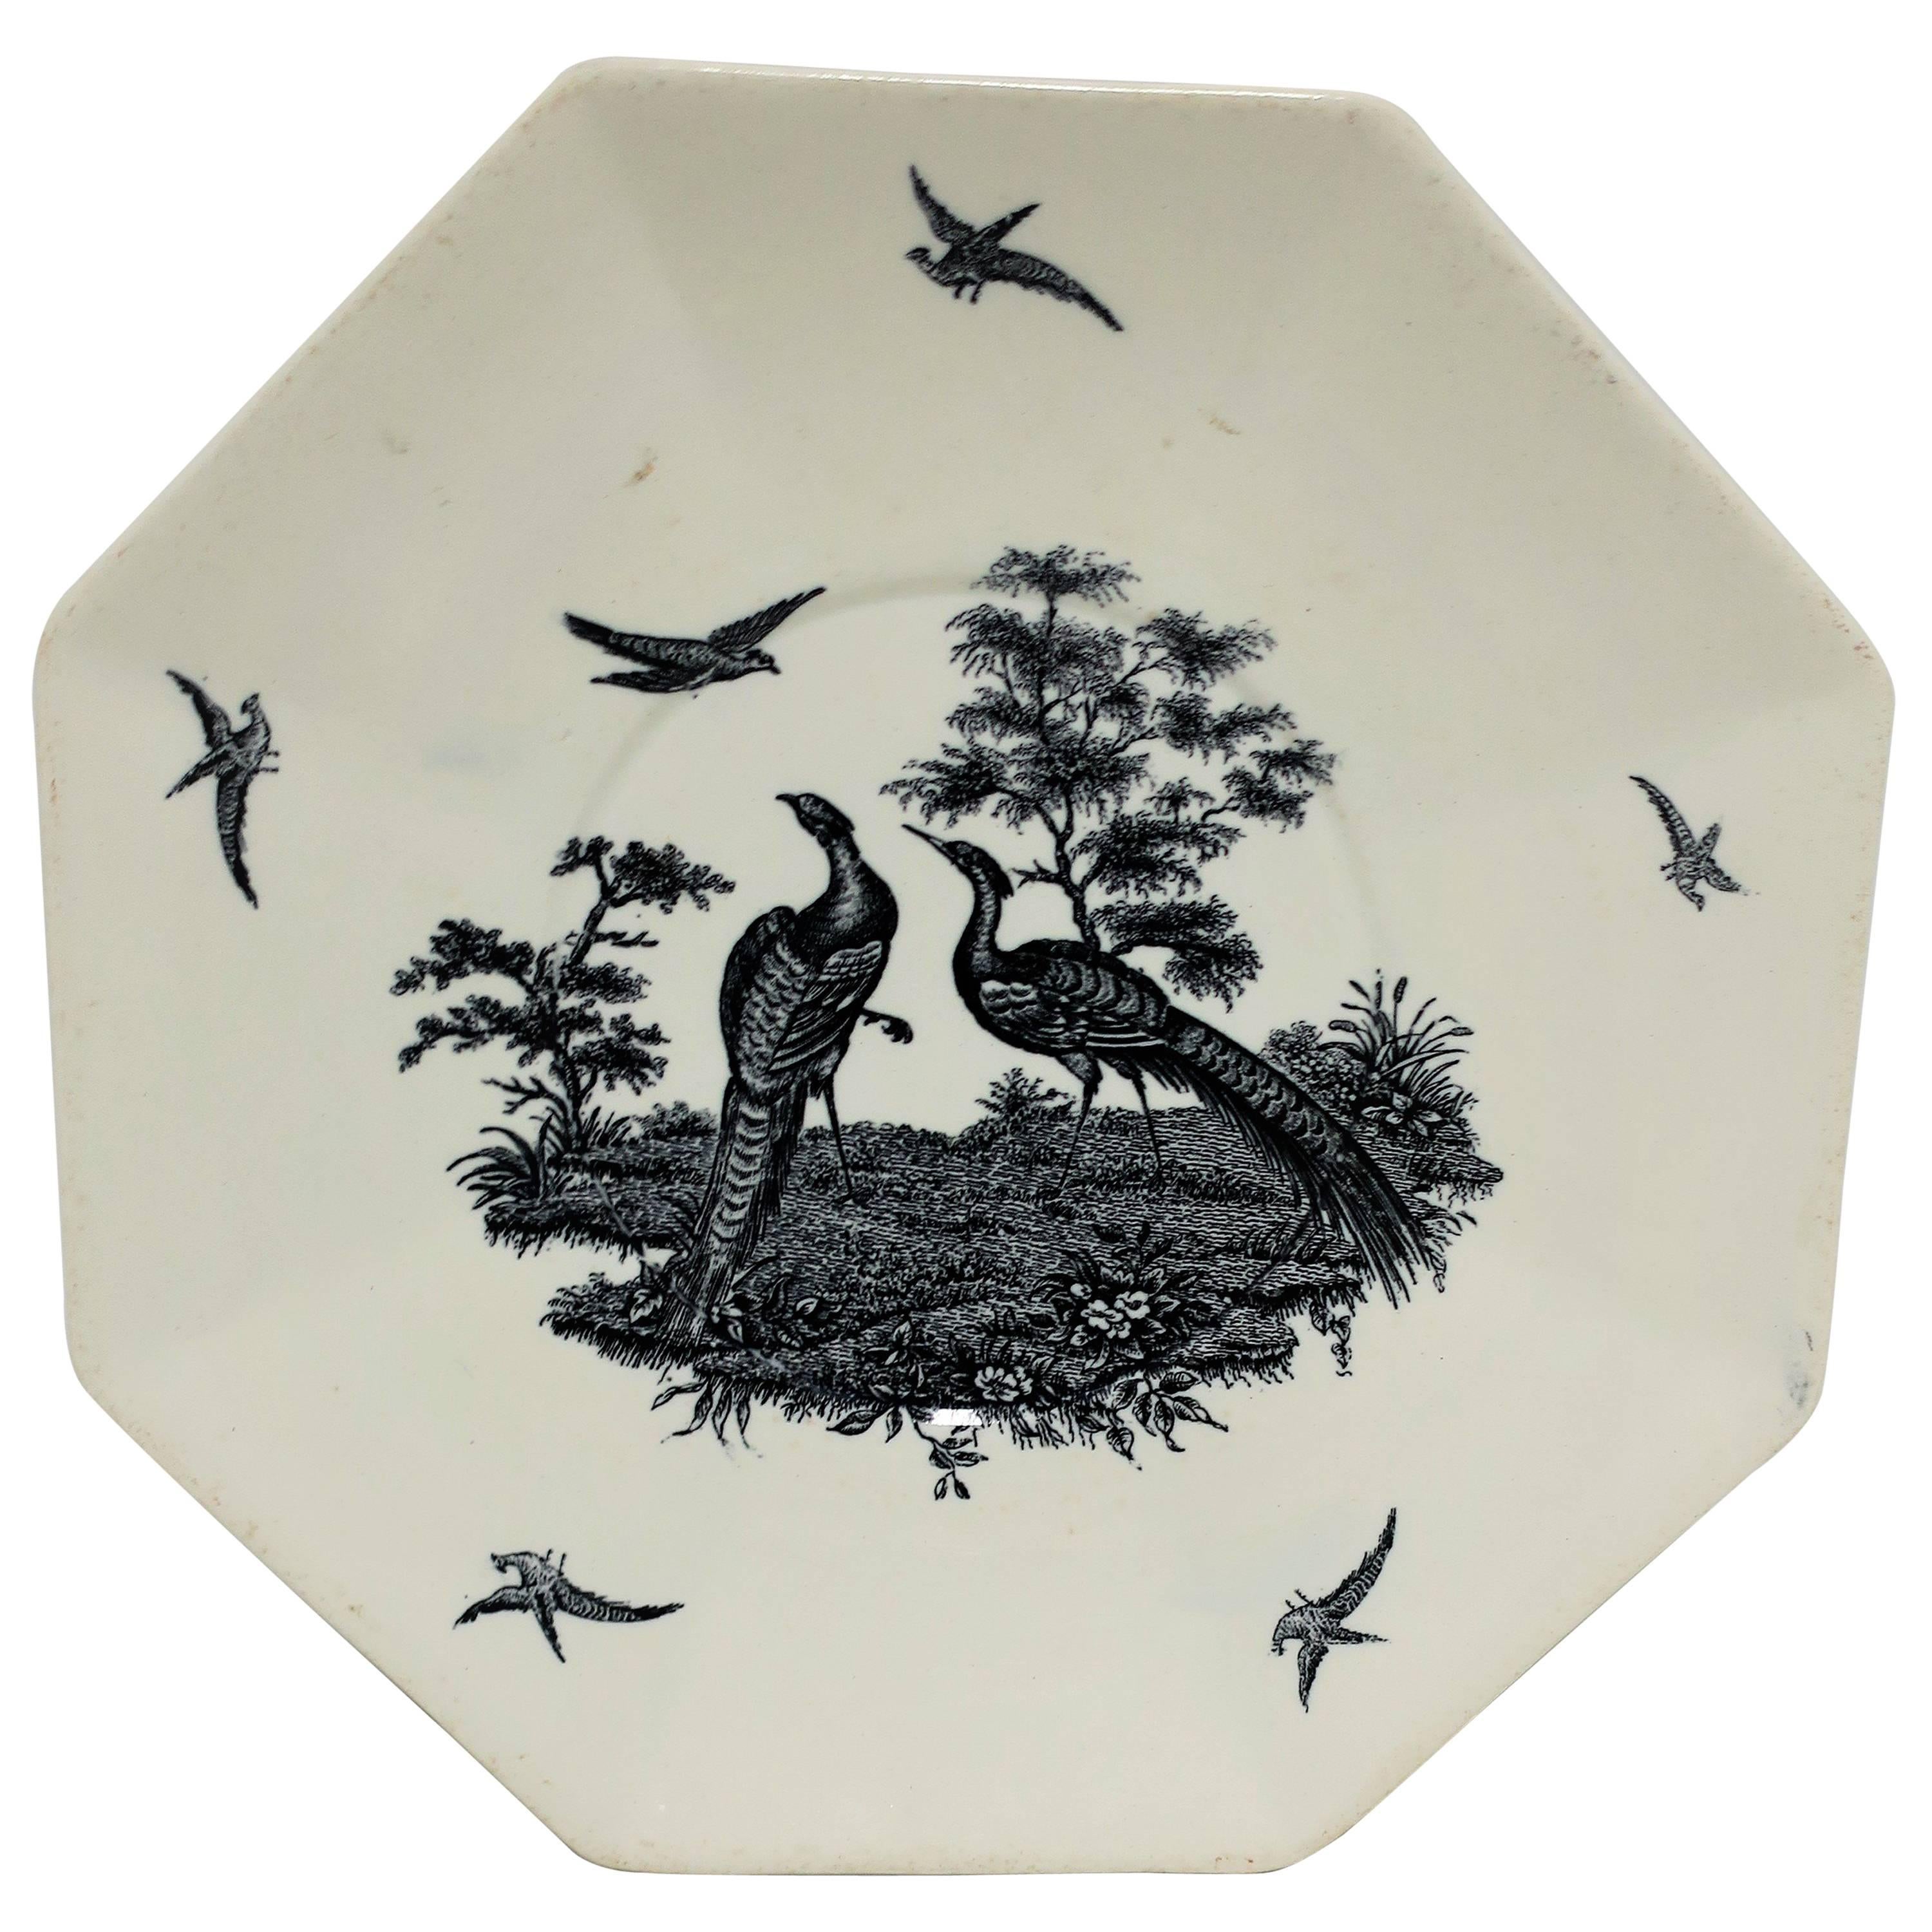 Octagonal English Black and White Peacock Bird Plate by Wedgwood England